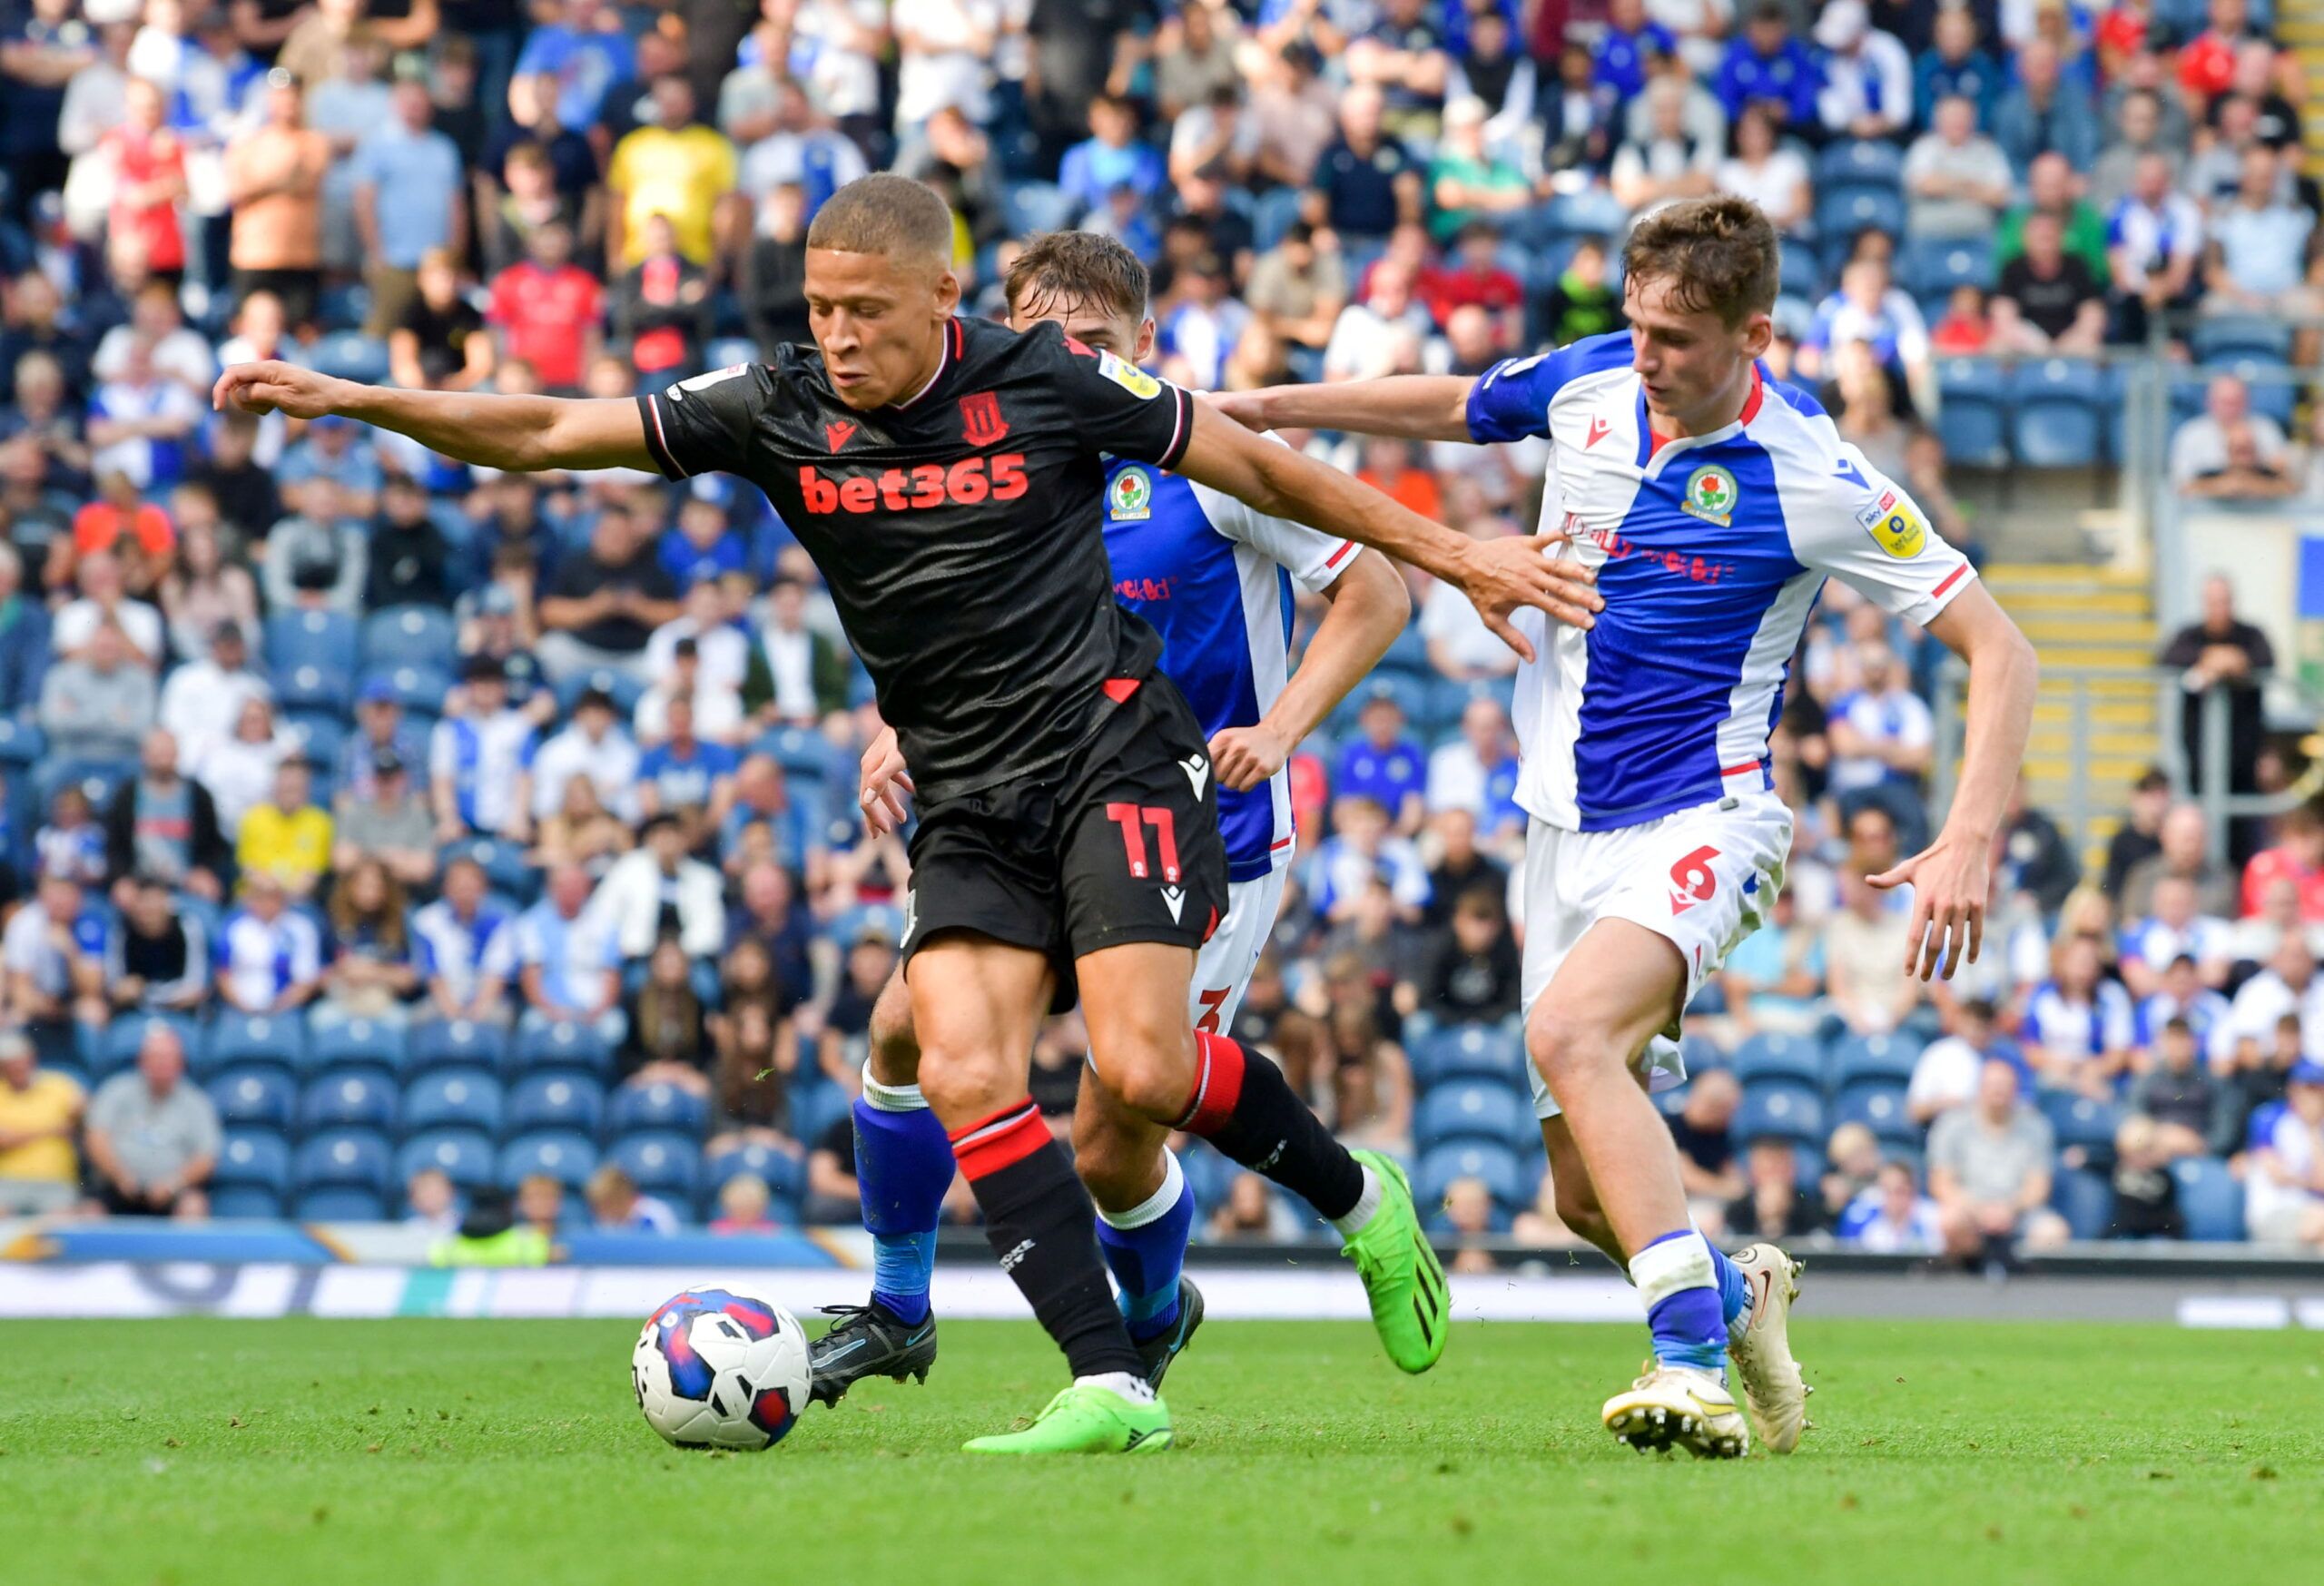 Soccer Football - Championship - Blackburn Rovers vs Stoke City - Ewood Park, Blackburn, Britain - August 27, 2022 Stoke City's Dwight Gayle in action with Blackburn Rovers' Tyler Morton Action Images/Paul Burrows  EDITORIAL USE ONLY. No use with unauthorized audio, video, data, fixture lists, club/league logos or 